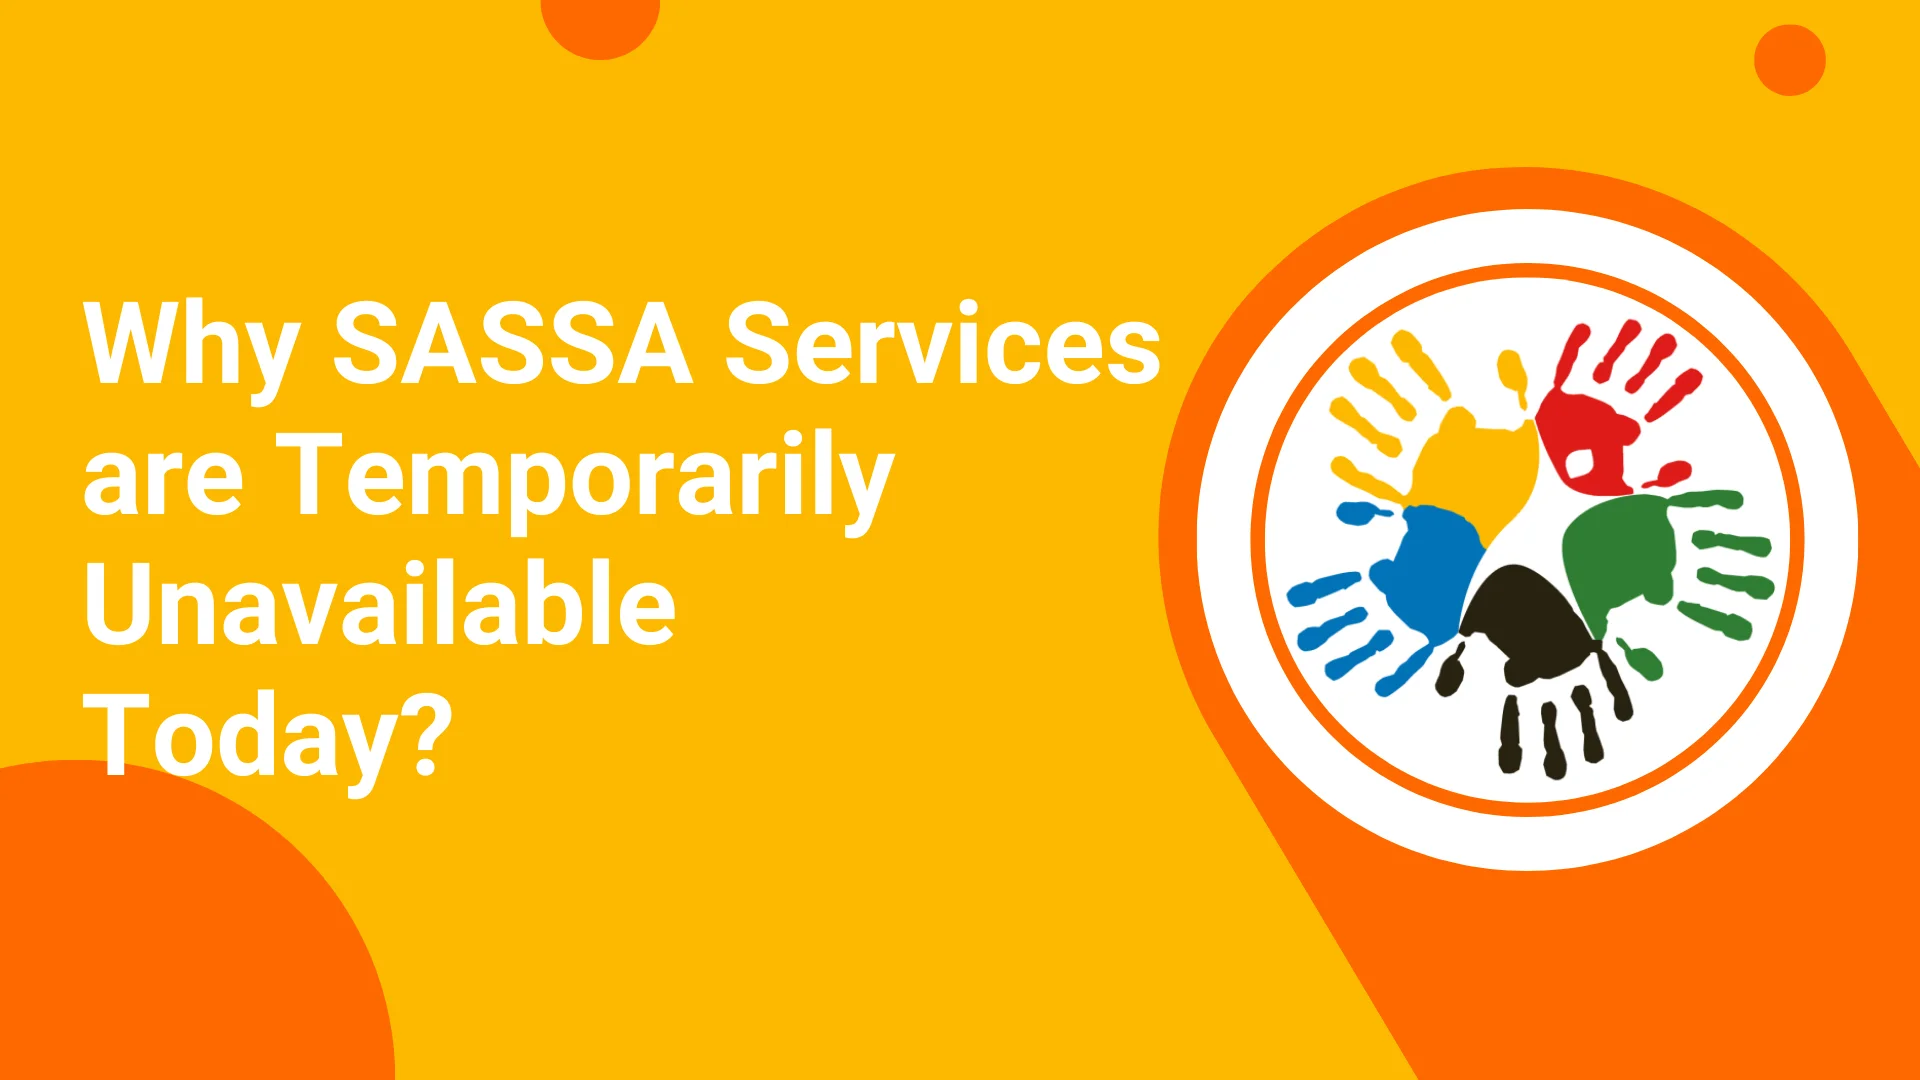 Why SASSA Services are Temporarily Unavailable Today